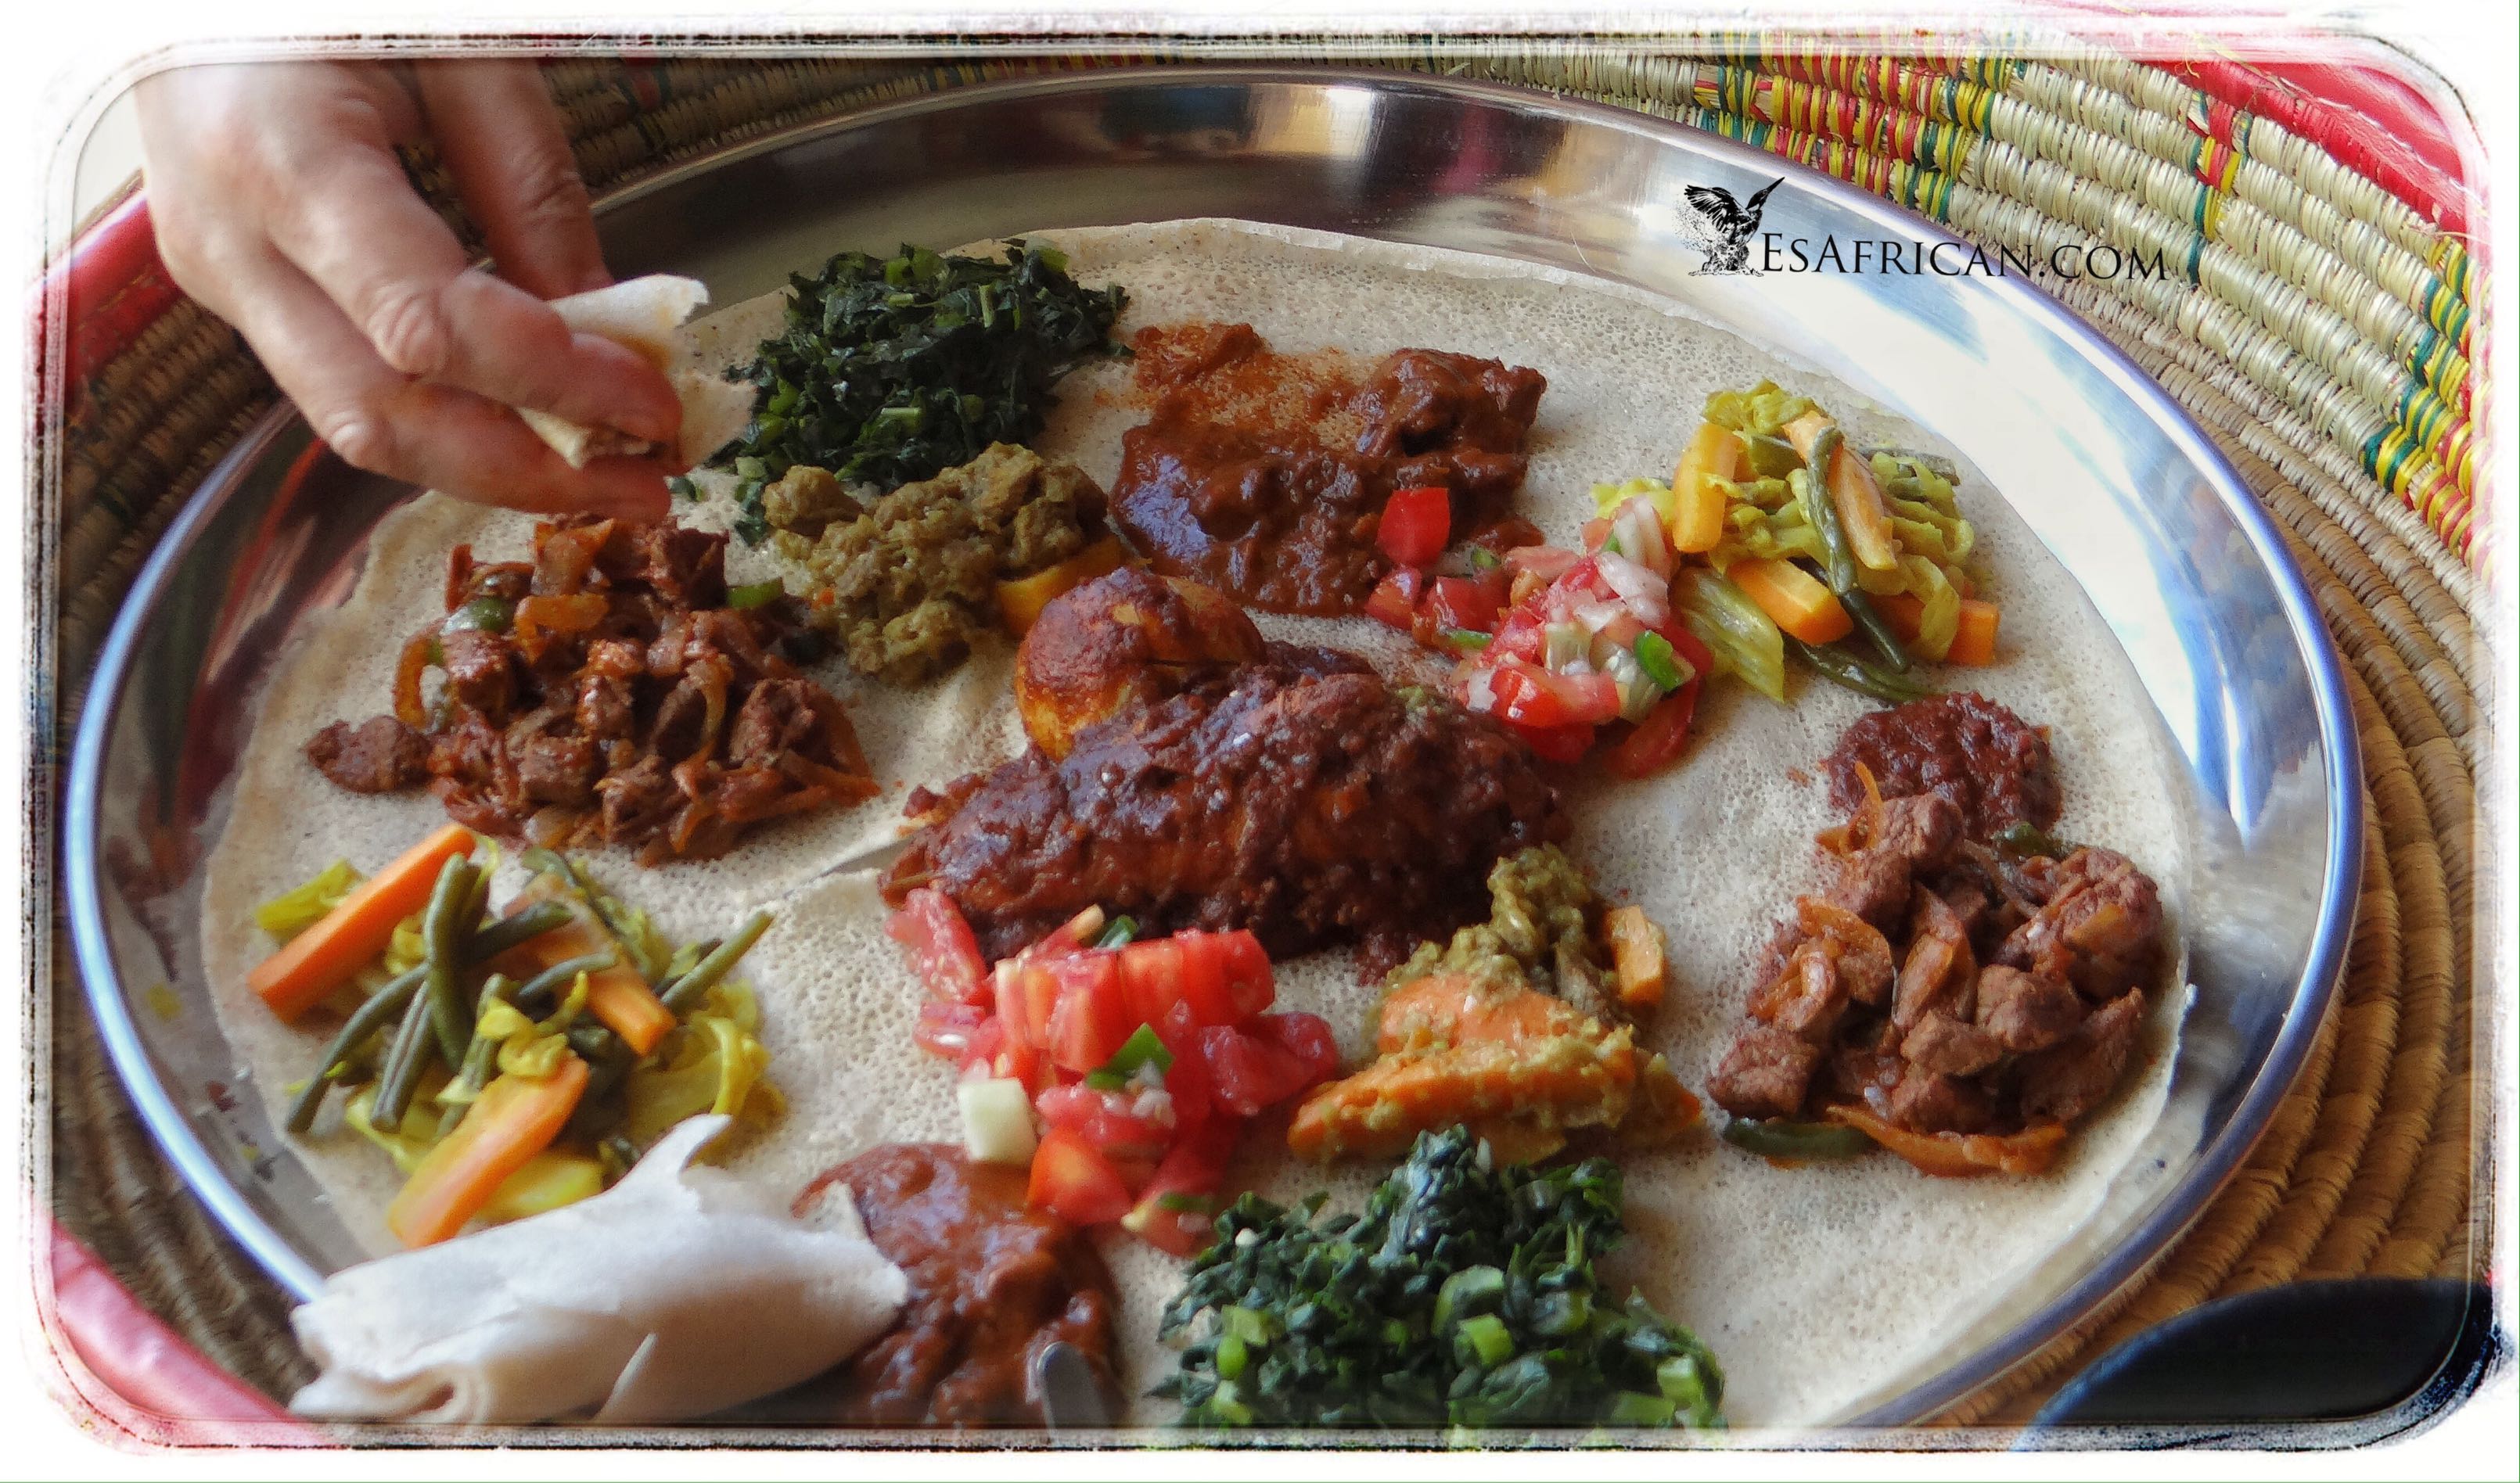 Delicious Ethiopian food is place on the injera within the moseb basket